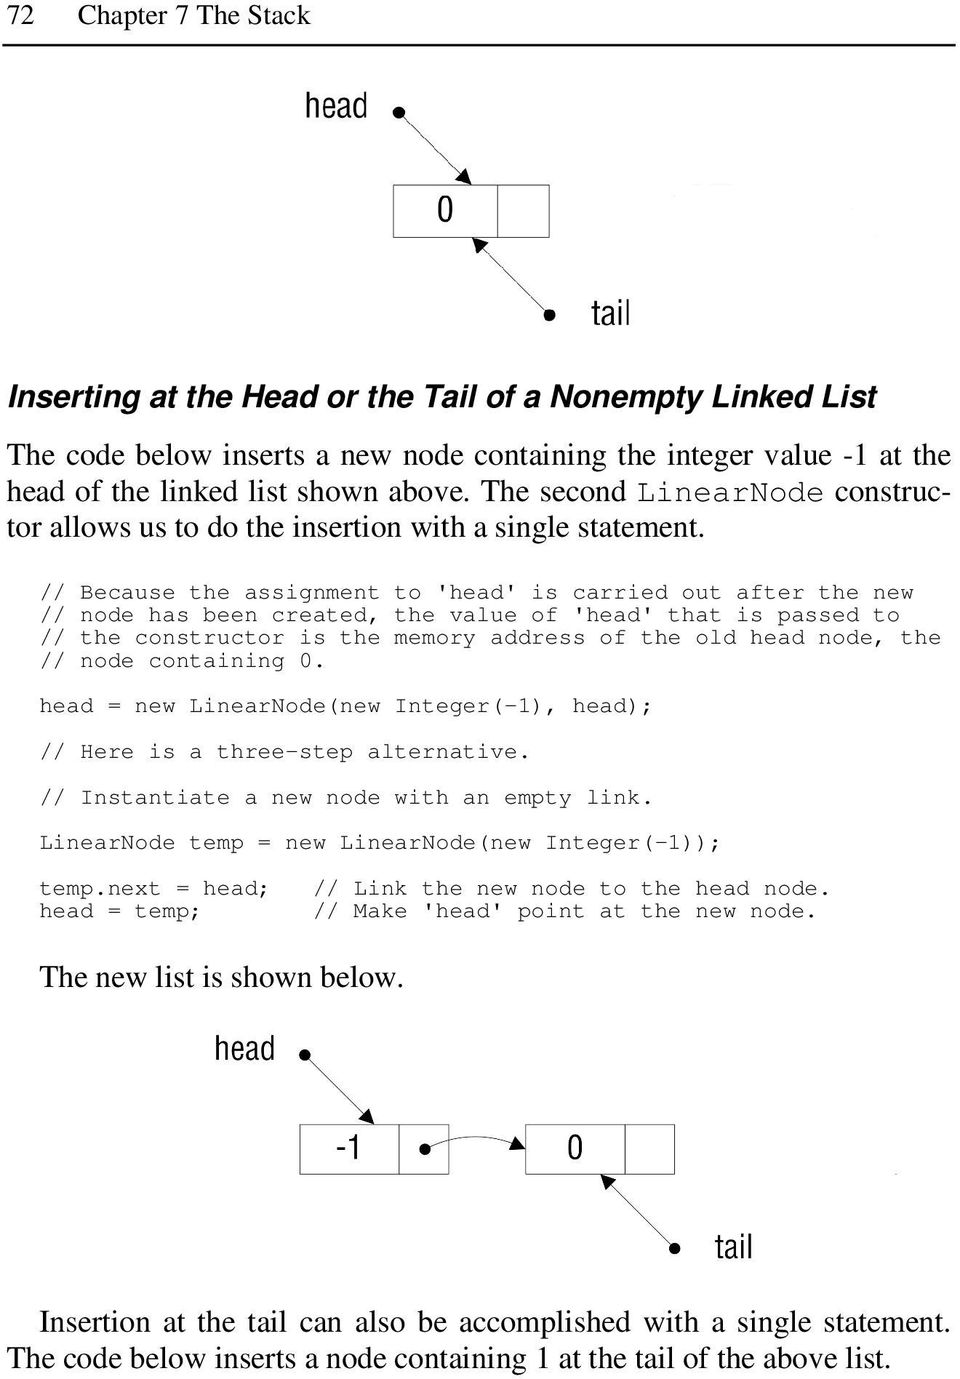 // Because the assignment to 'head' is carried out after the new // node has been created, the value of 'head' that is passed to // the constructor is the memory address of the old head node, the //